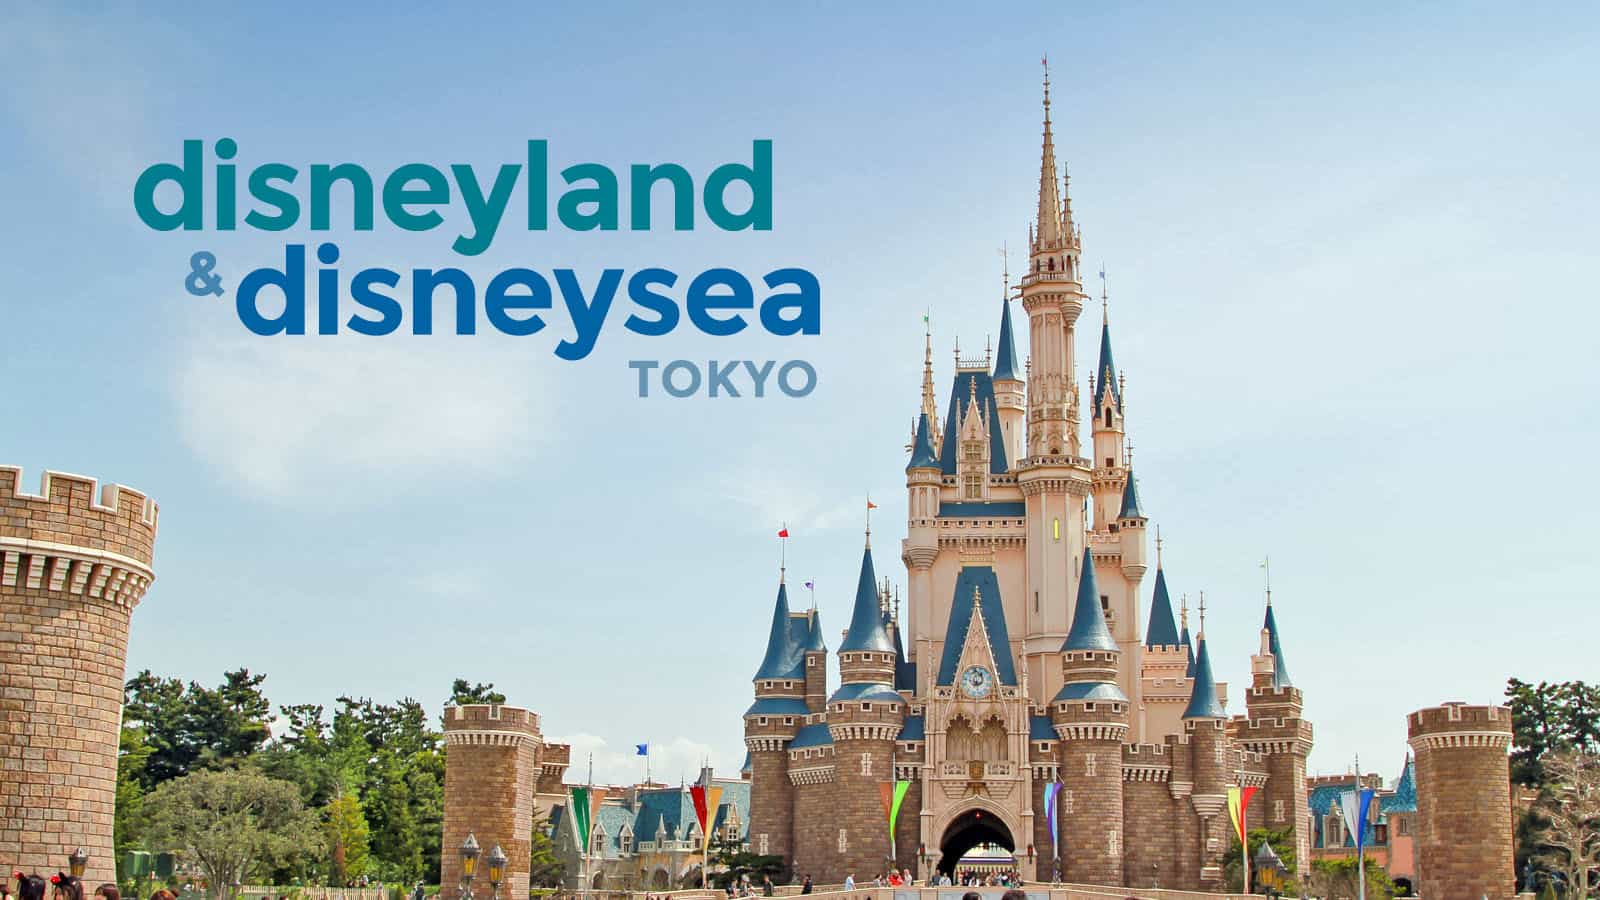 Tokyo Disneyland Disneysea Guide For First Timers The Poor